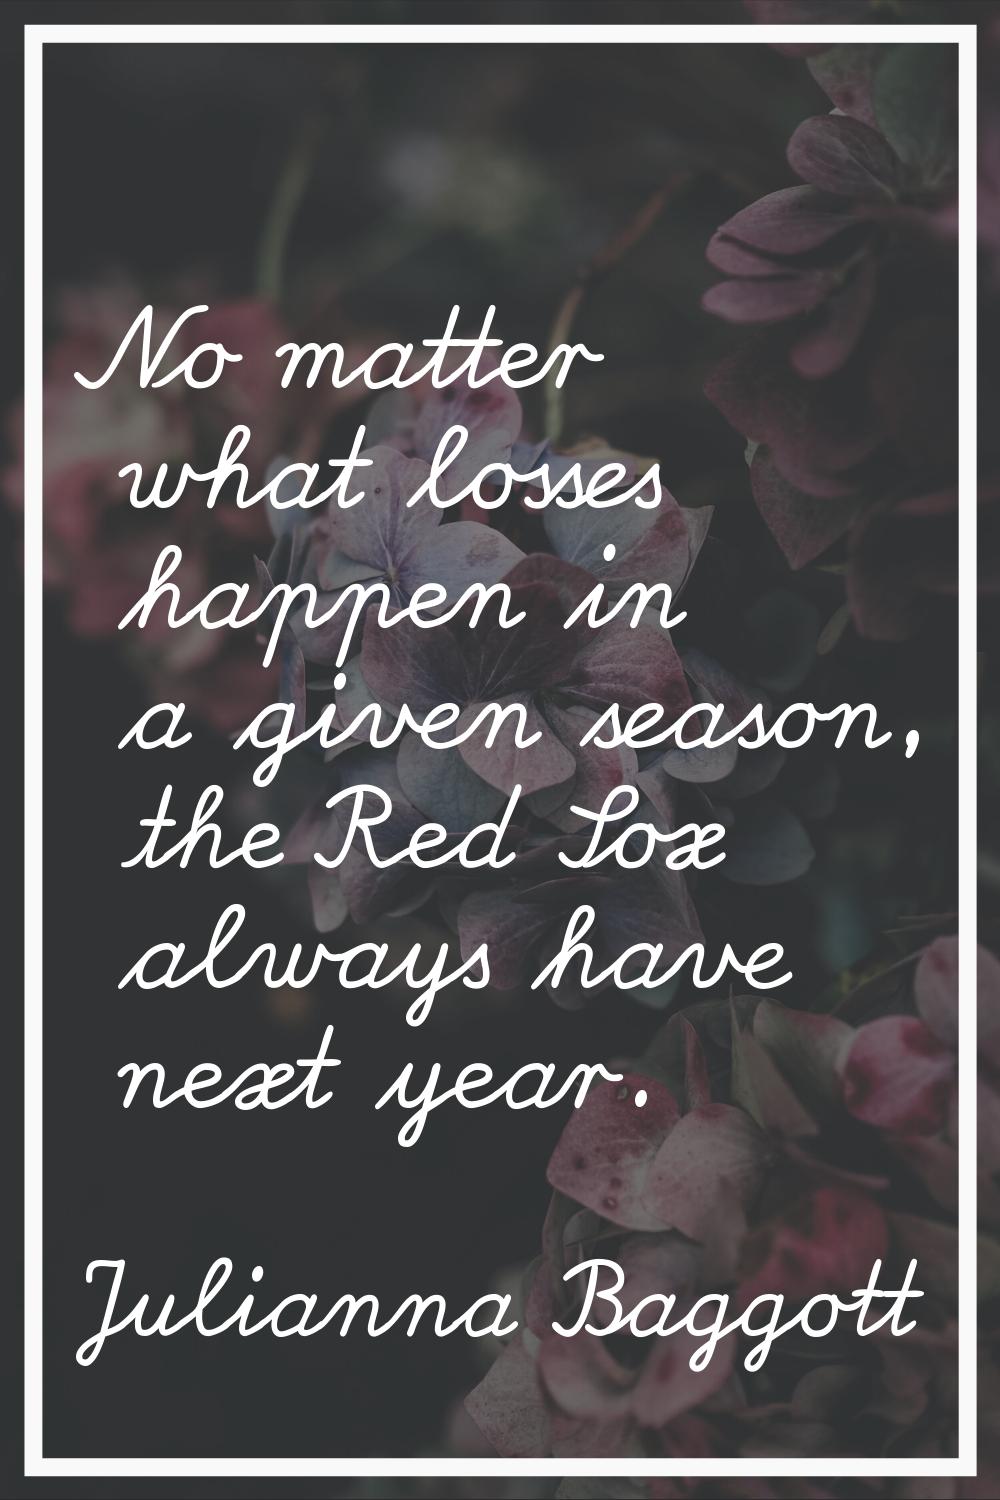 No matter what losses happen in a given season, the Red Sox always have next year.